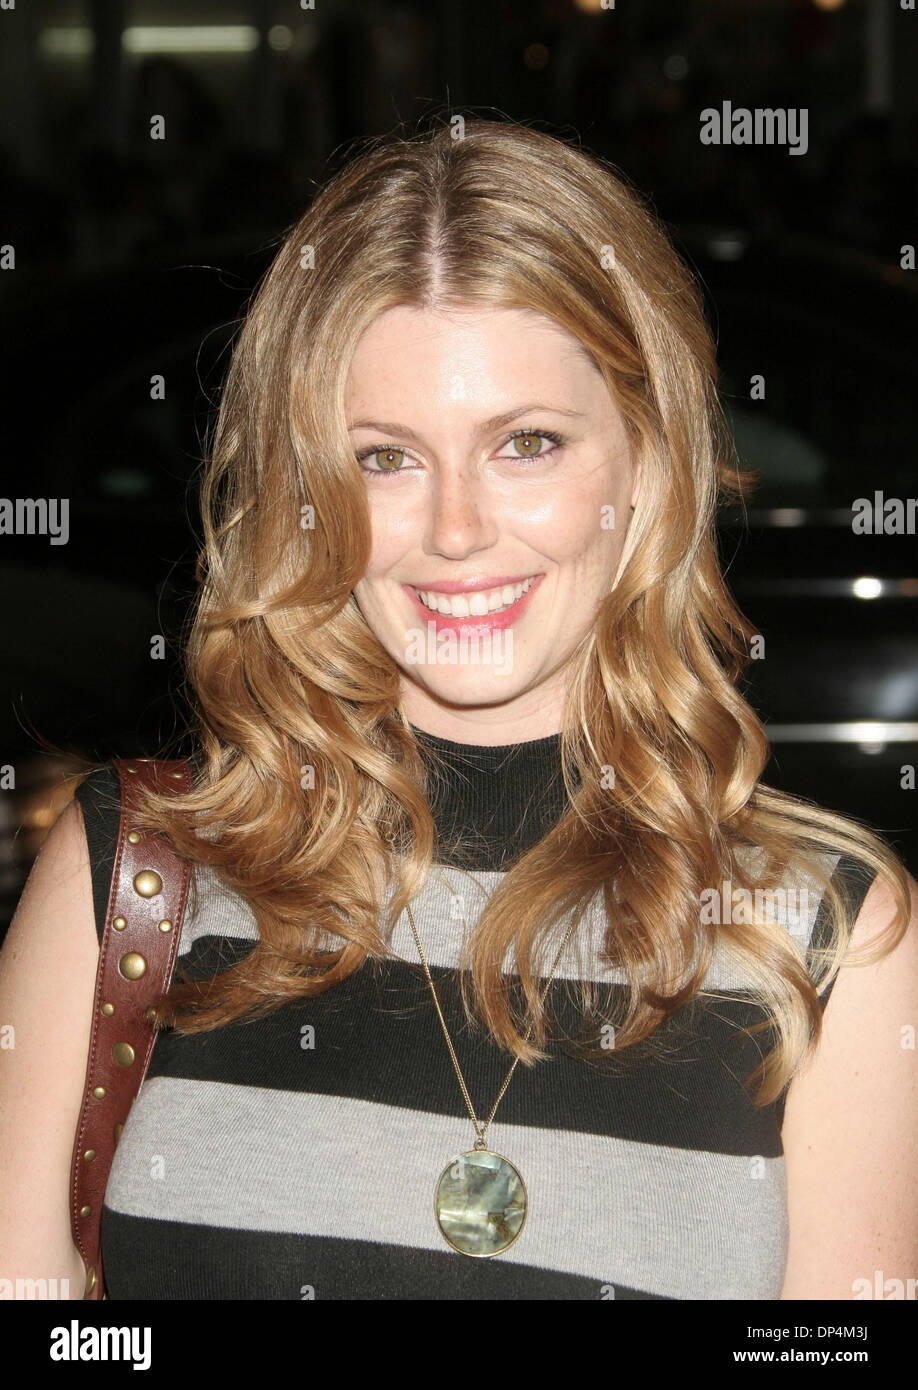 Aug 17, 2006; Los Angeles, CA, USA;  Actress DIORA BAIRD   at the 'Snakes On A Plane' Los Angeles Premiere held at Grauman's Chinese Theatre, Hollywood. Mandatory Credit: Photo by Paul Fenton/ZUMA KPA.. (©) Copyright 2006 by Paul Fenton Stock Photo